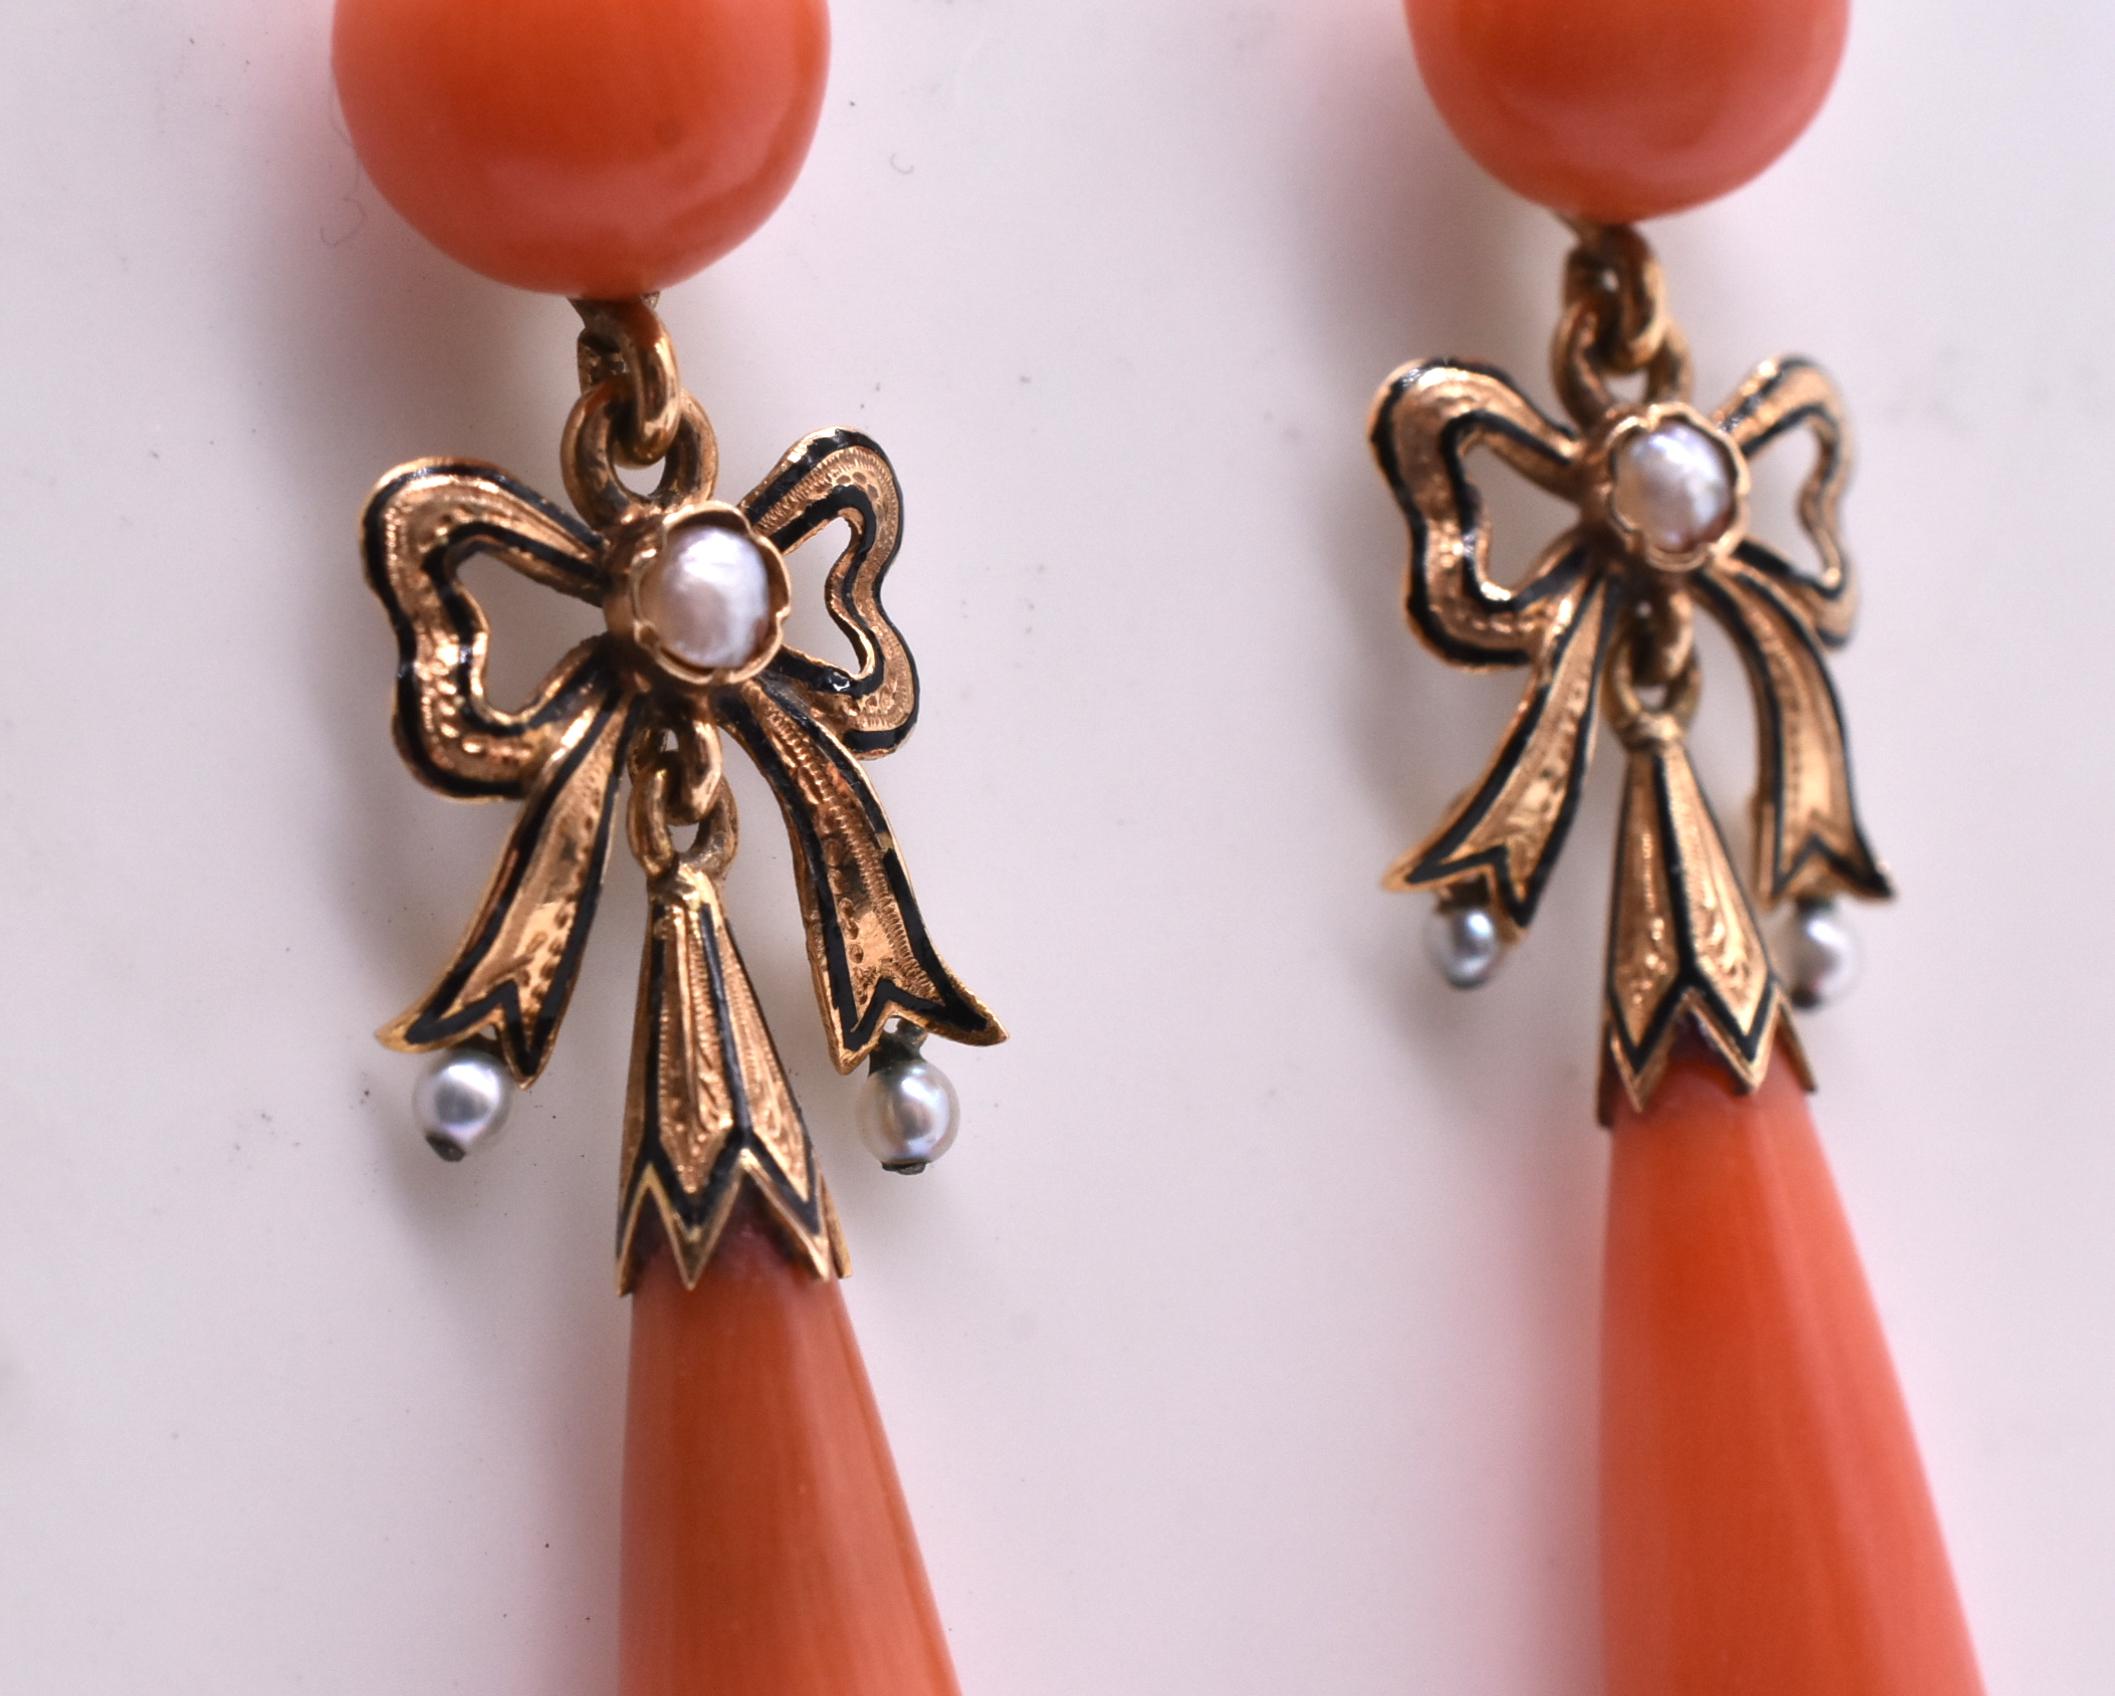 Cabochon Antique Coral Earrings with Pearls and Enamel Bow For Sale